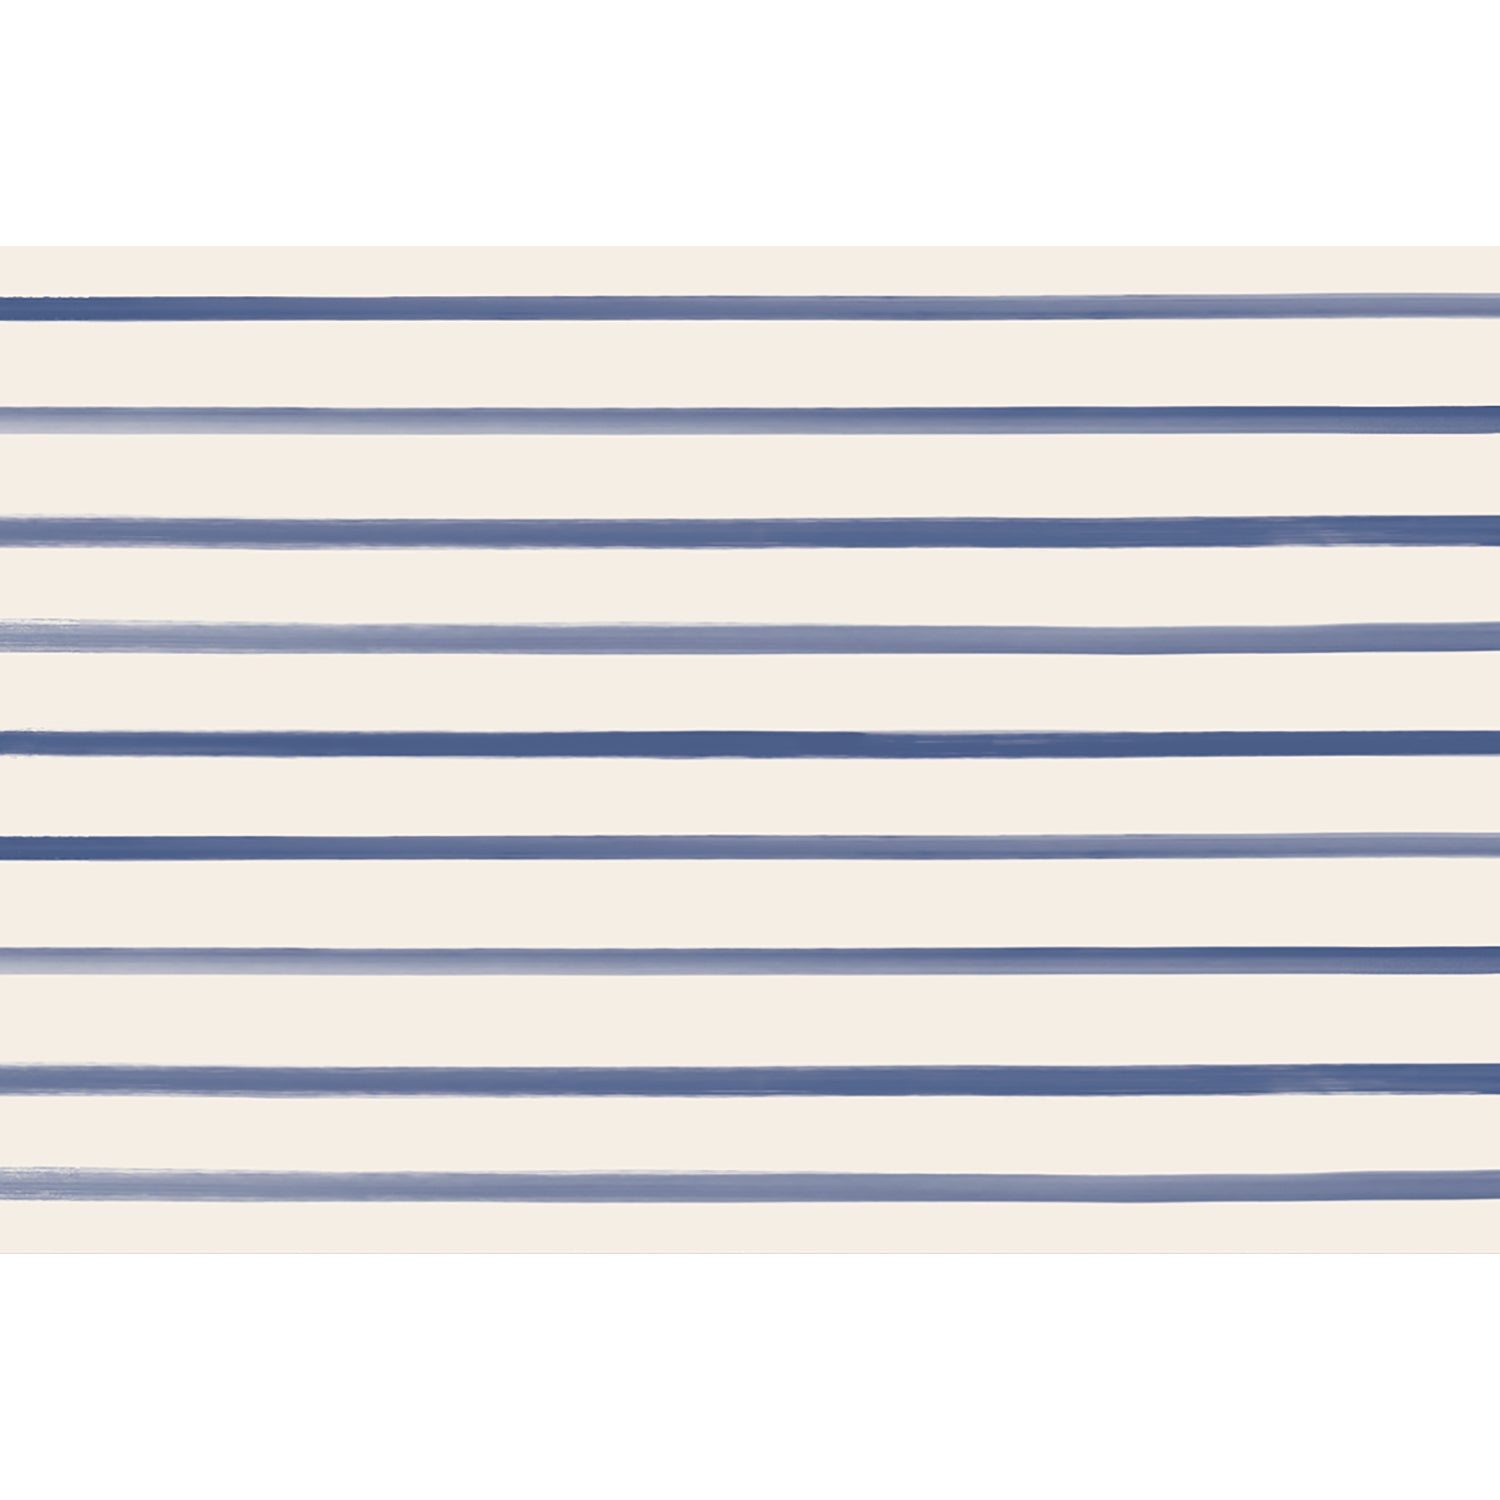 Evenly-spaced, horizontal blue lines painted on a white backgroud.